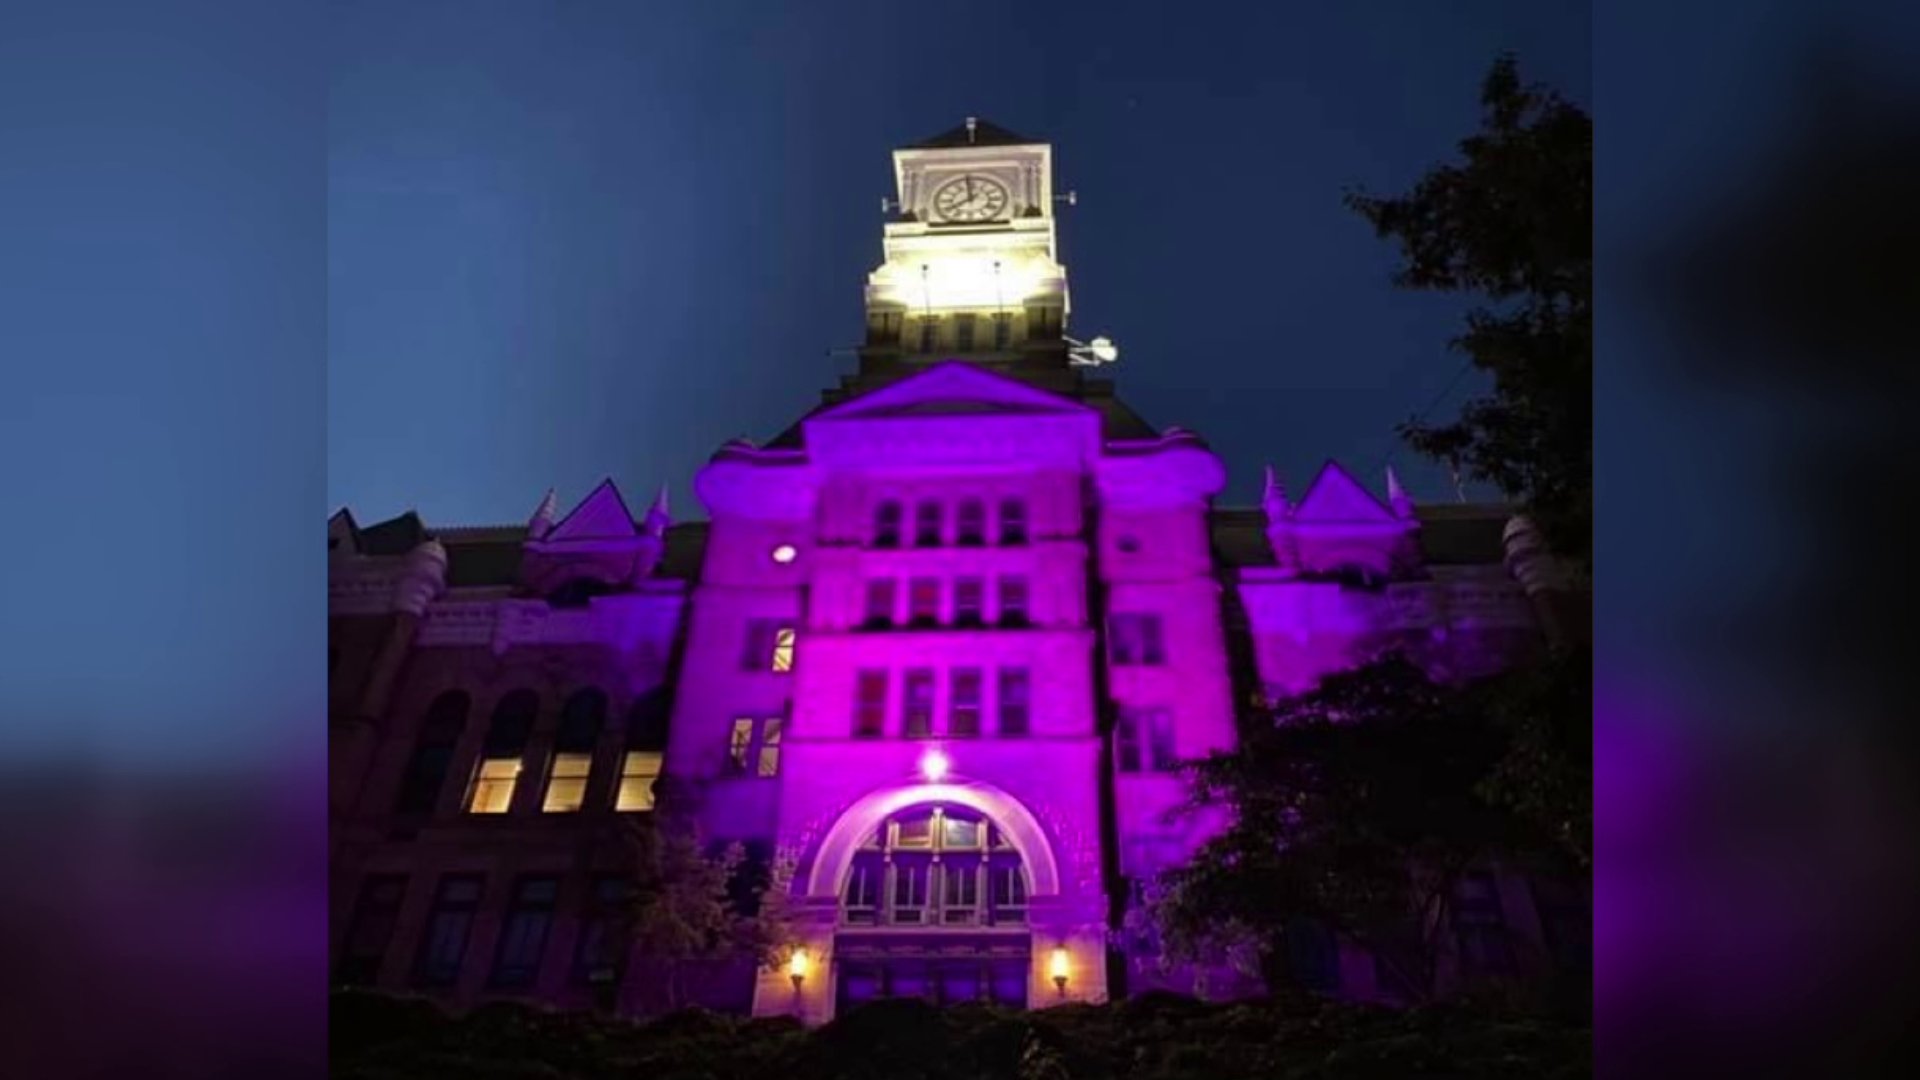 The courthouse will light up purple every night through the month of September.